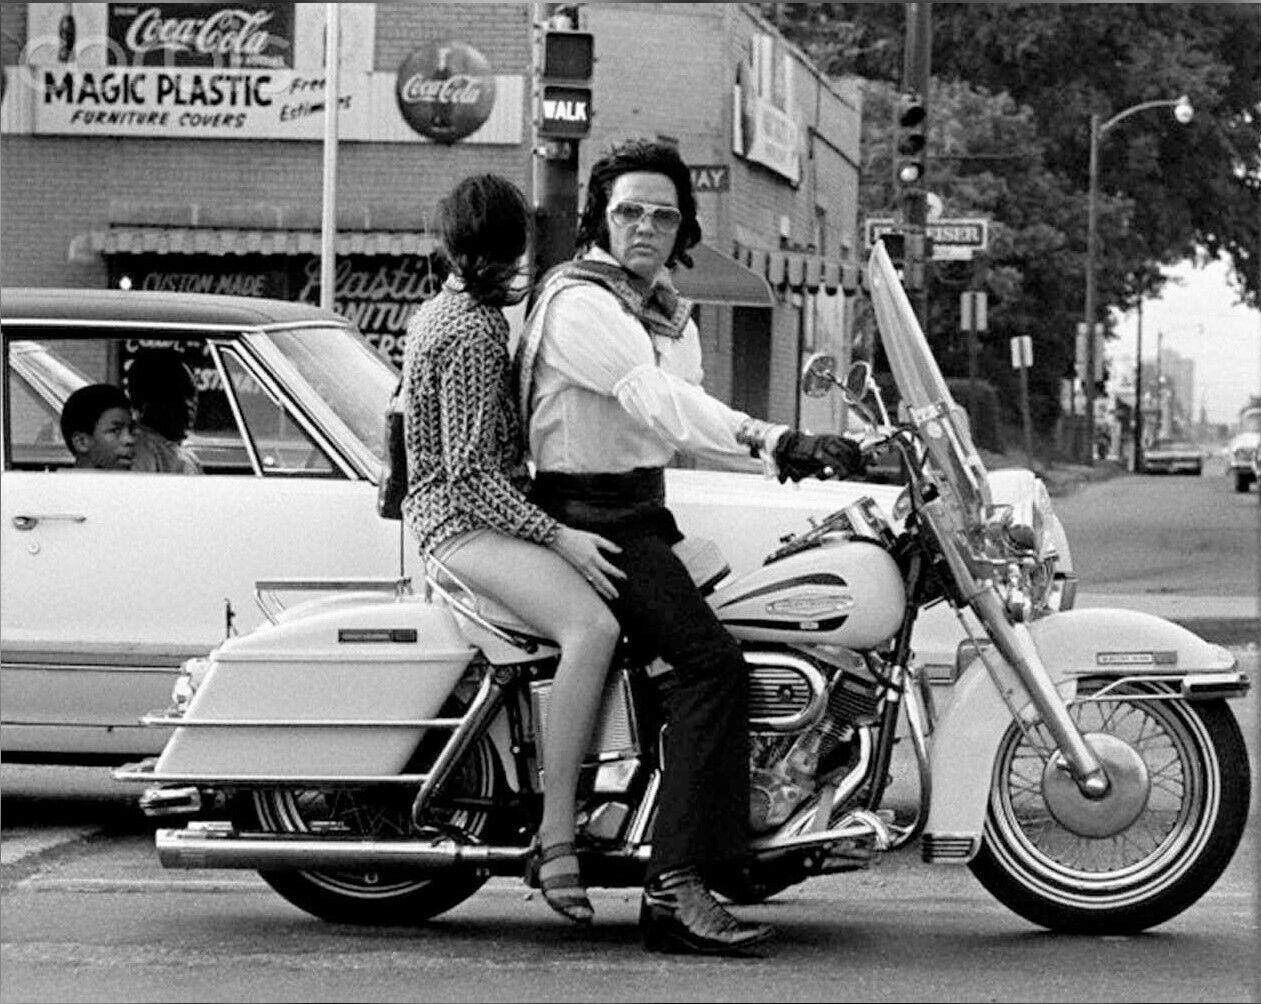 RARE Elvis and Mary Selph 71 Harley Memphis 1972 8x10 Photo Reprint